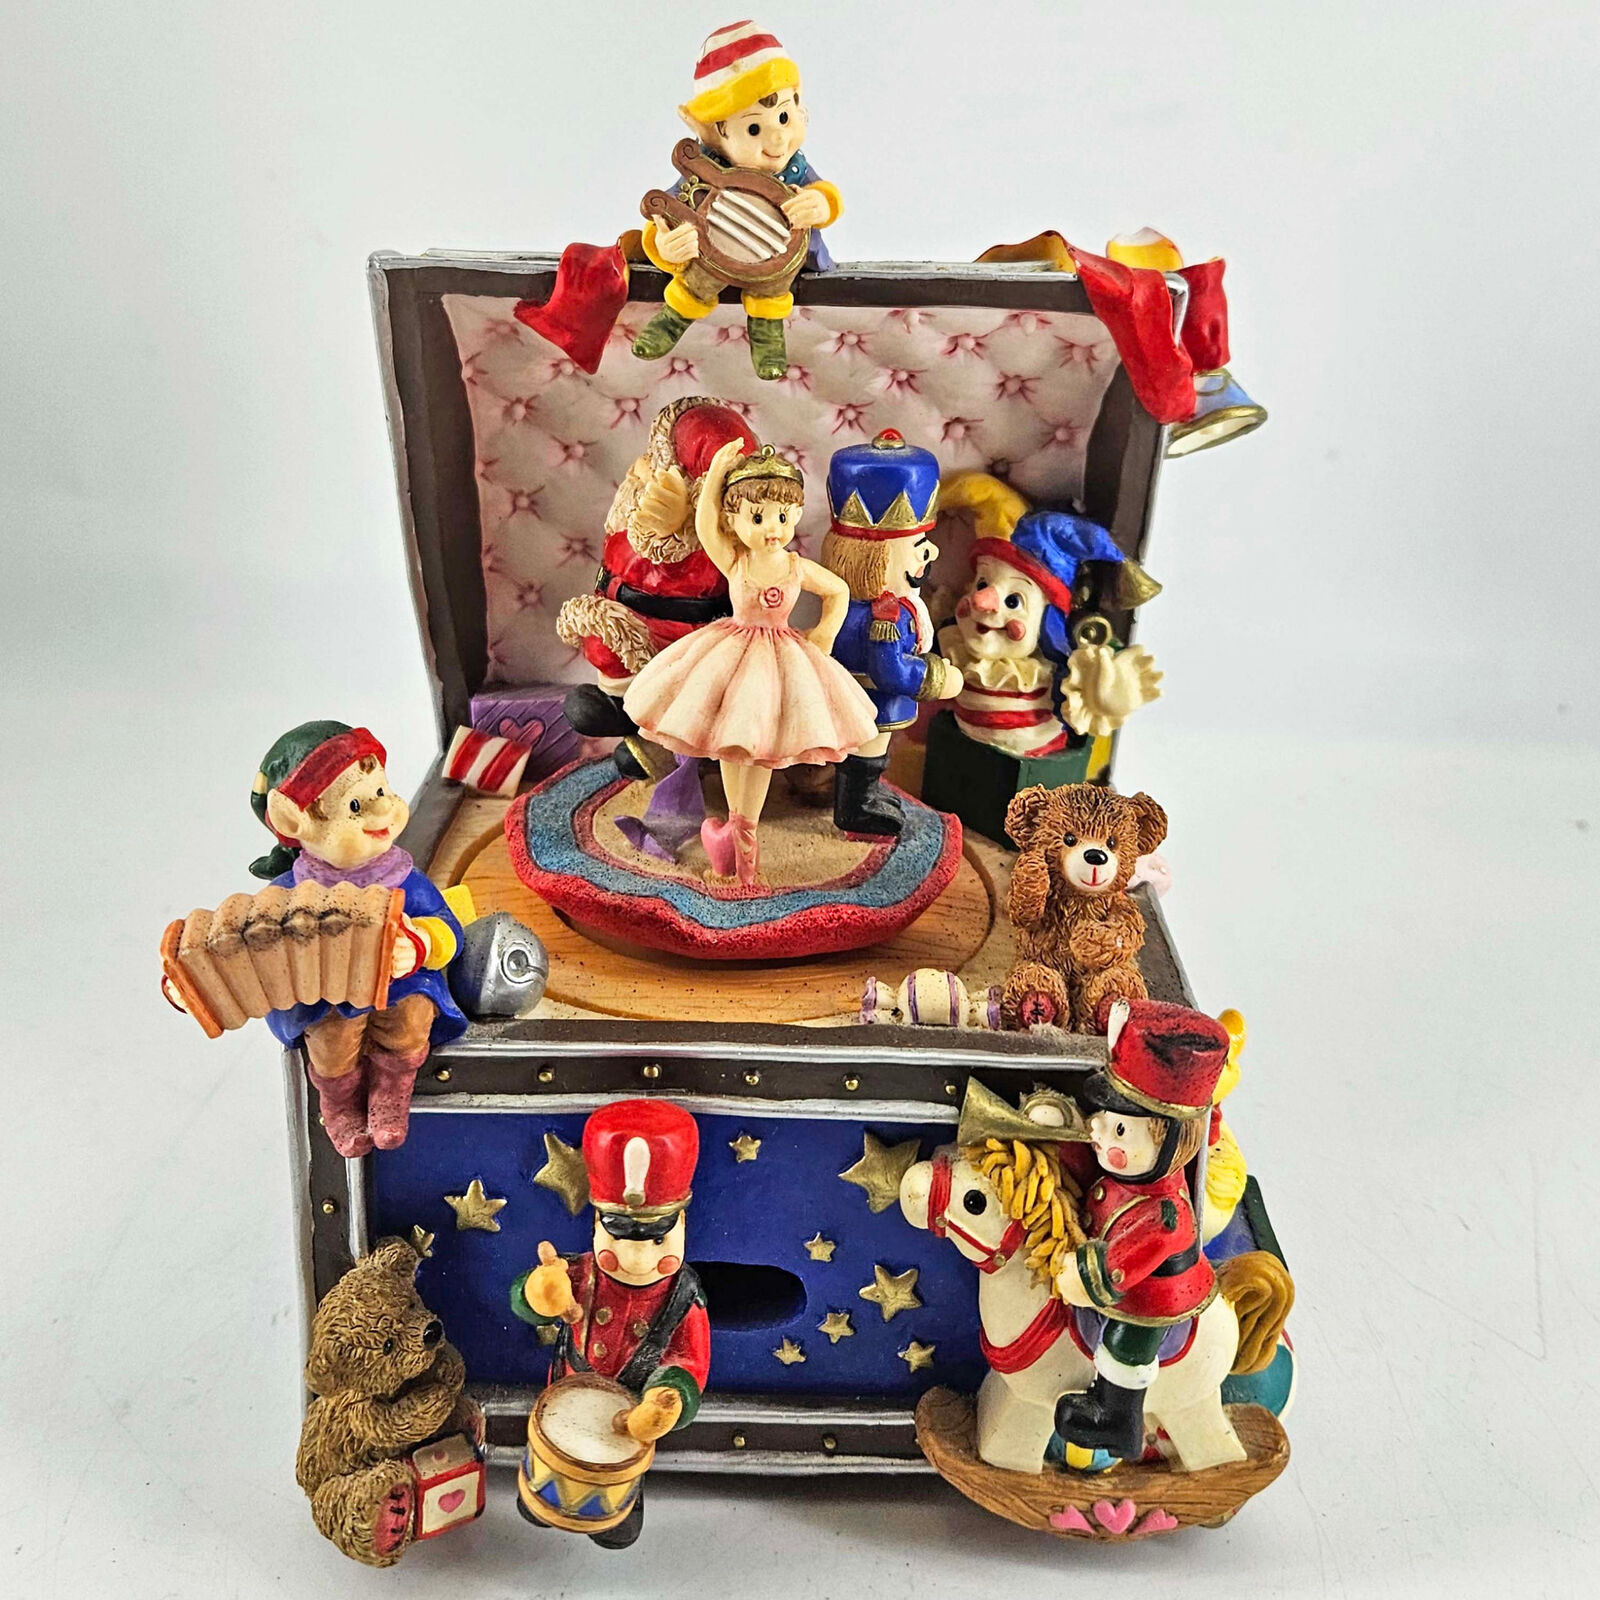 San Francisco Music Box Company Christmas toy chest ballerina elves toy soldiers